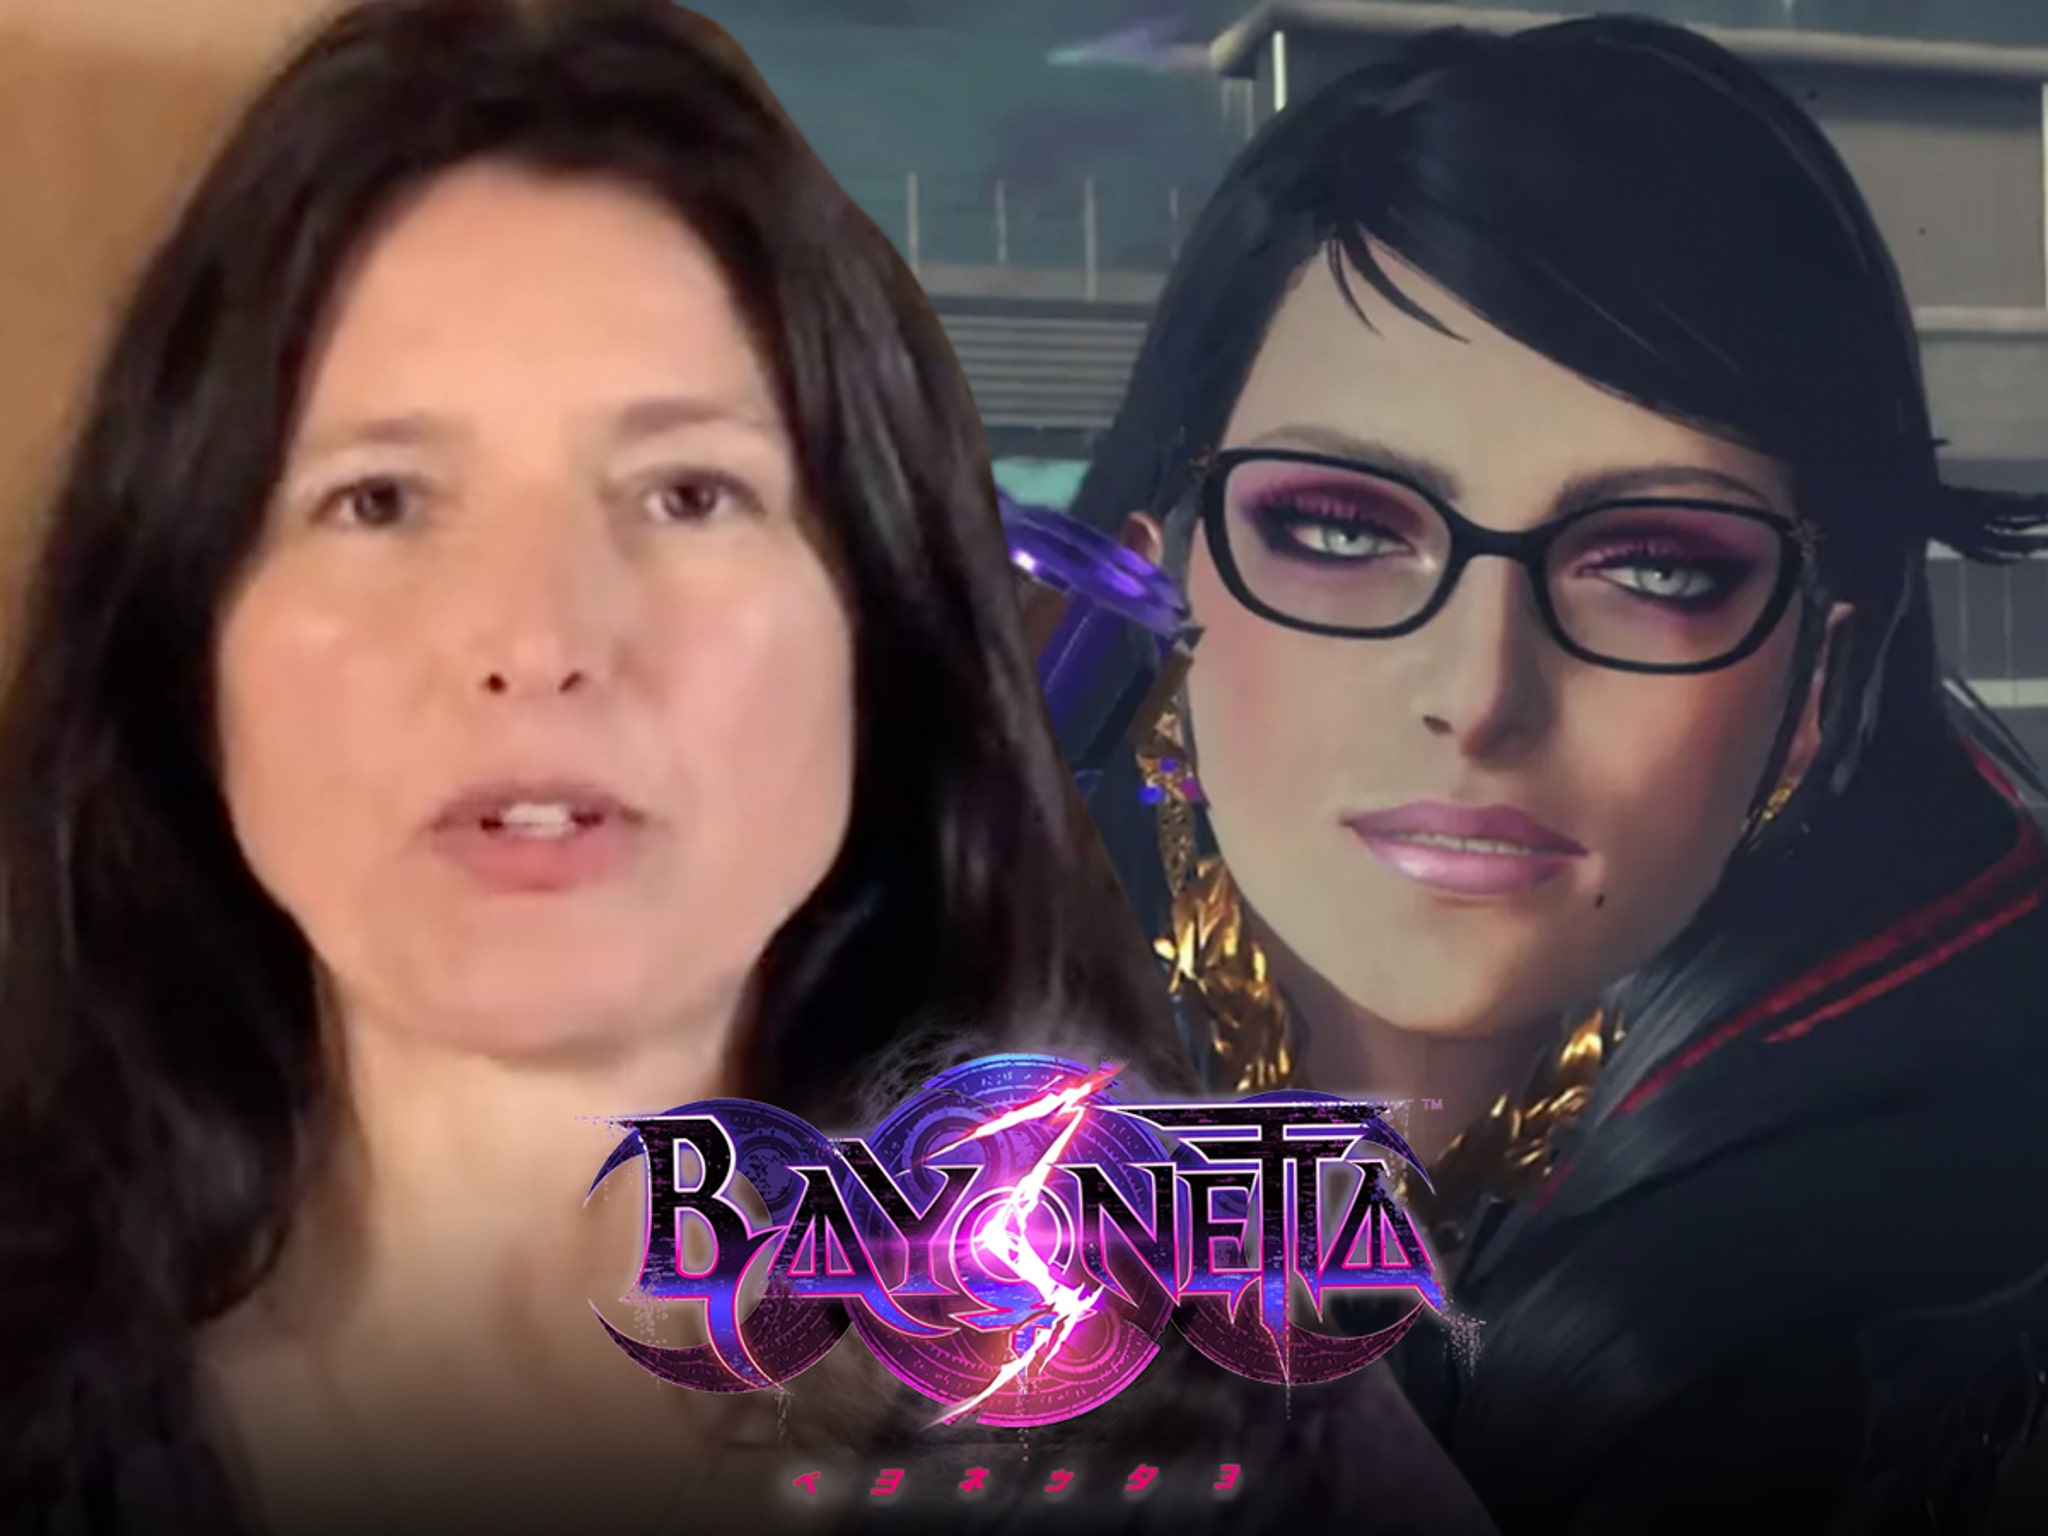 Bayonetta's Original Voice Actor Disputes Claims, Says She Only Asked For  'A Fair, Living Wage